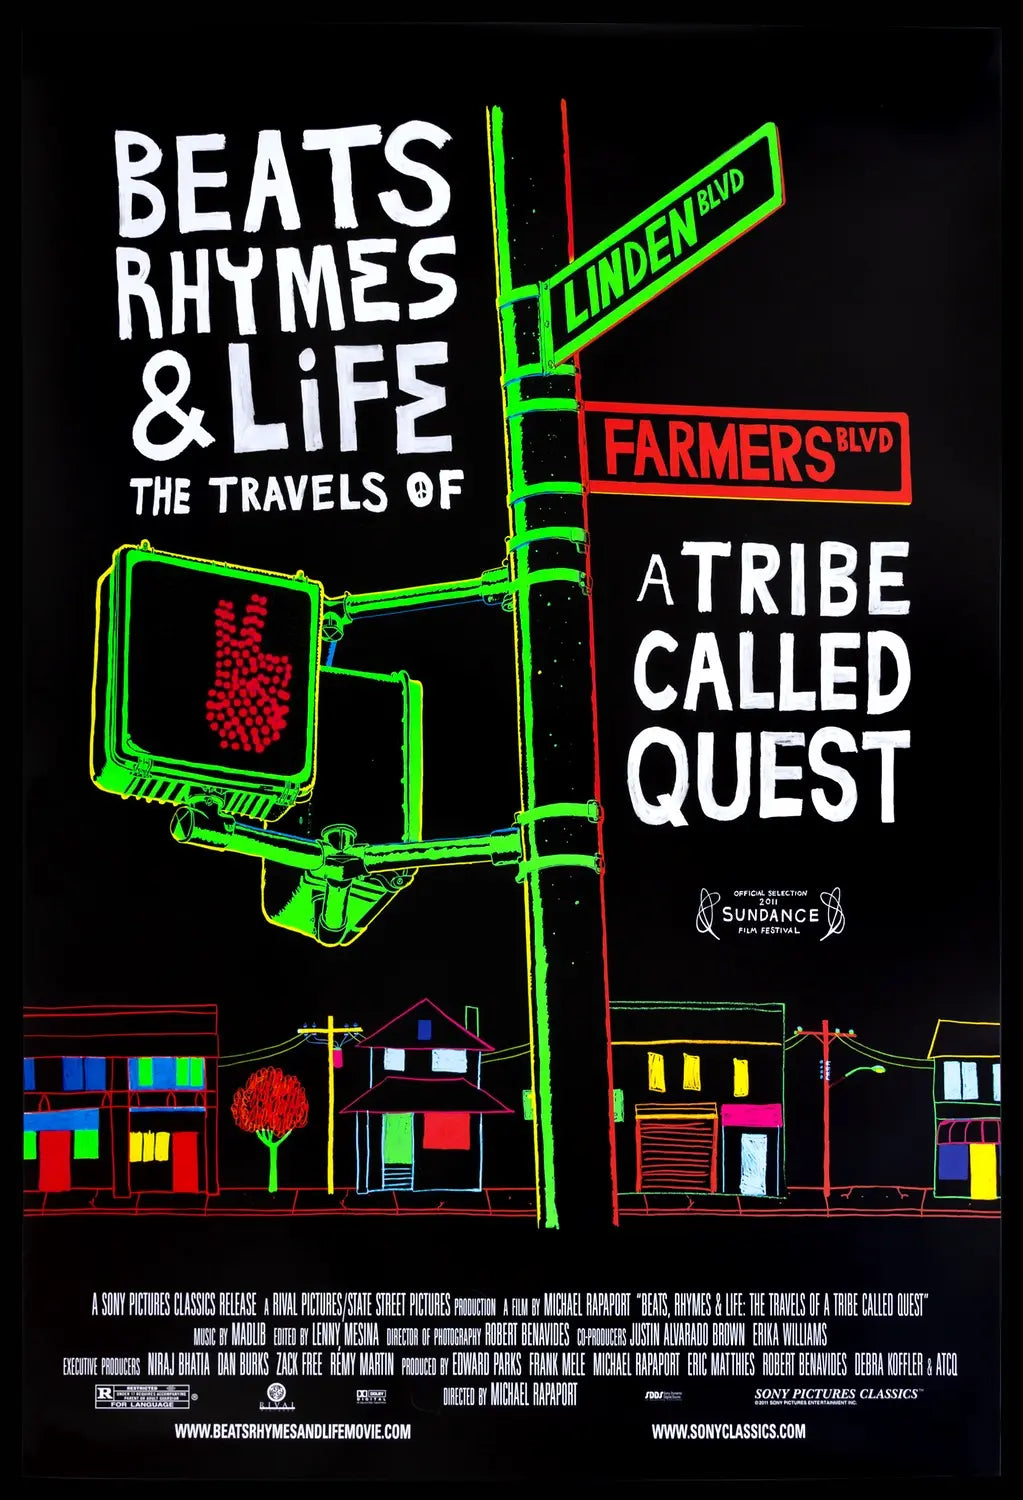 Beats, Rhymes &amp; Life - The Travels of a Tribe Called Quest (2011) original movie poster for sale at Original Film Art